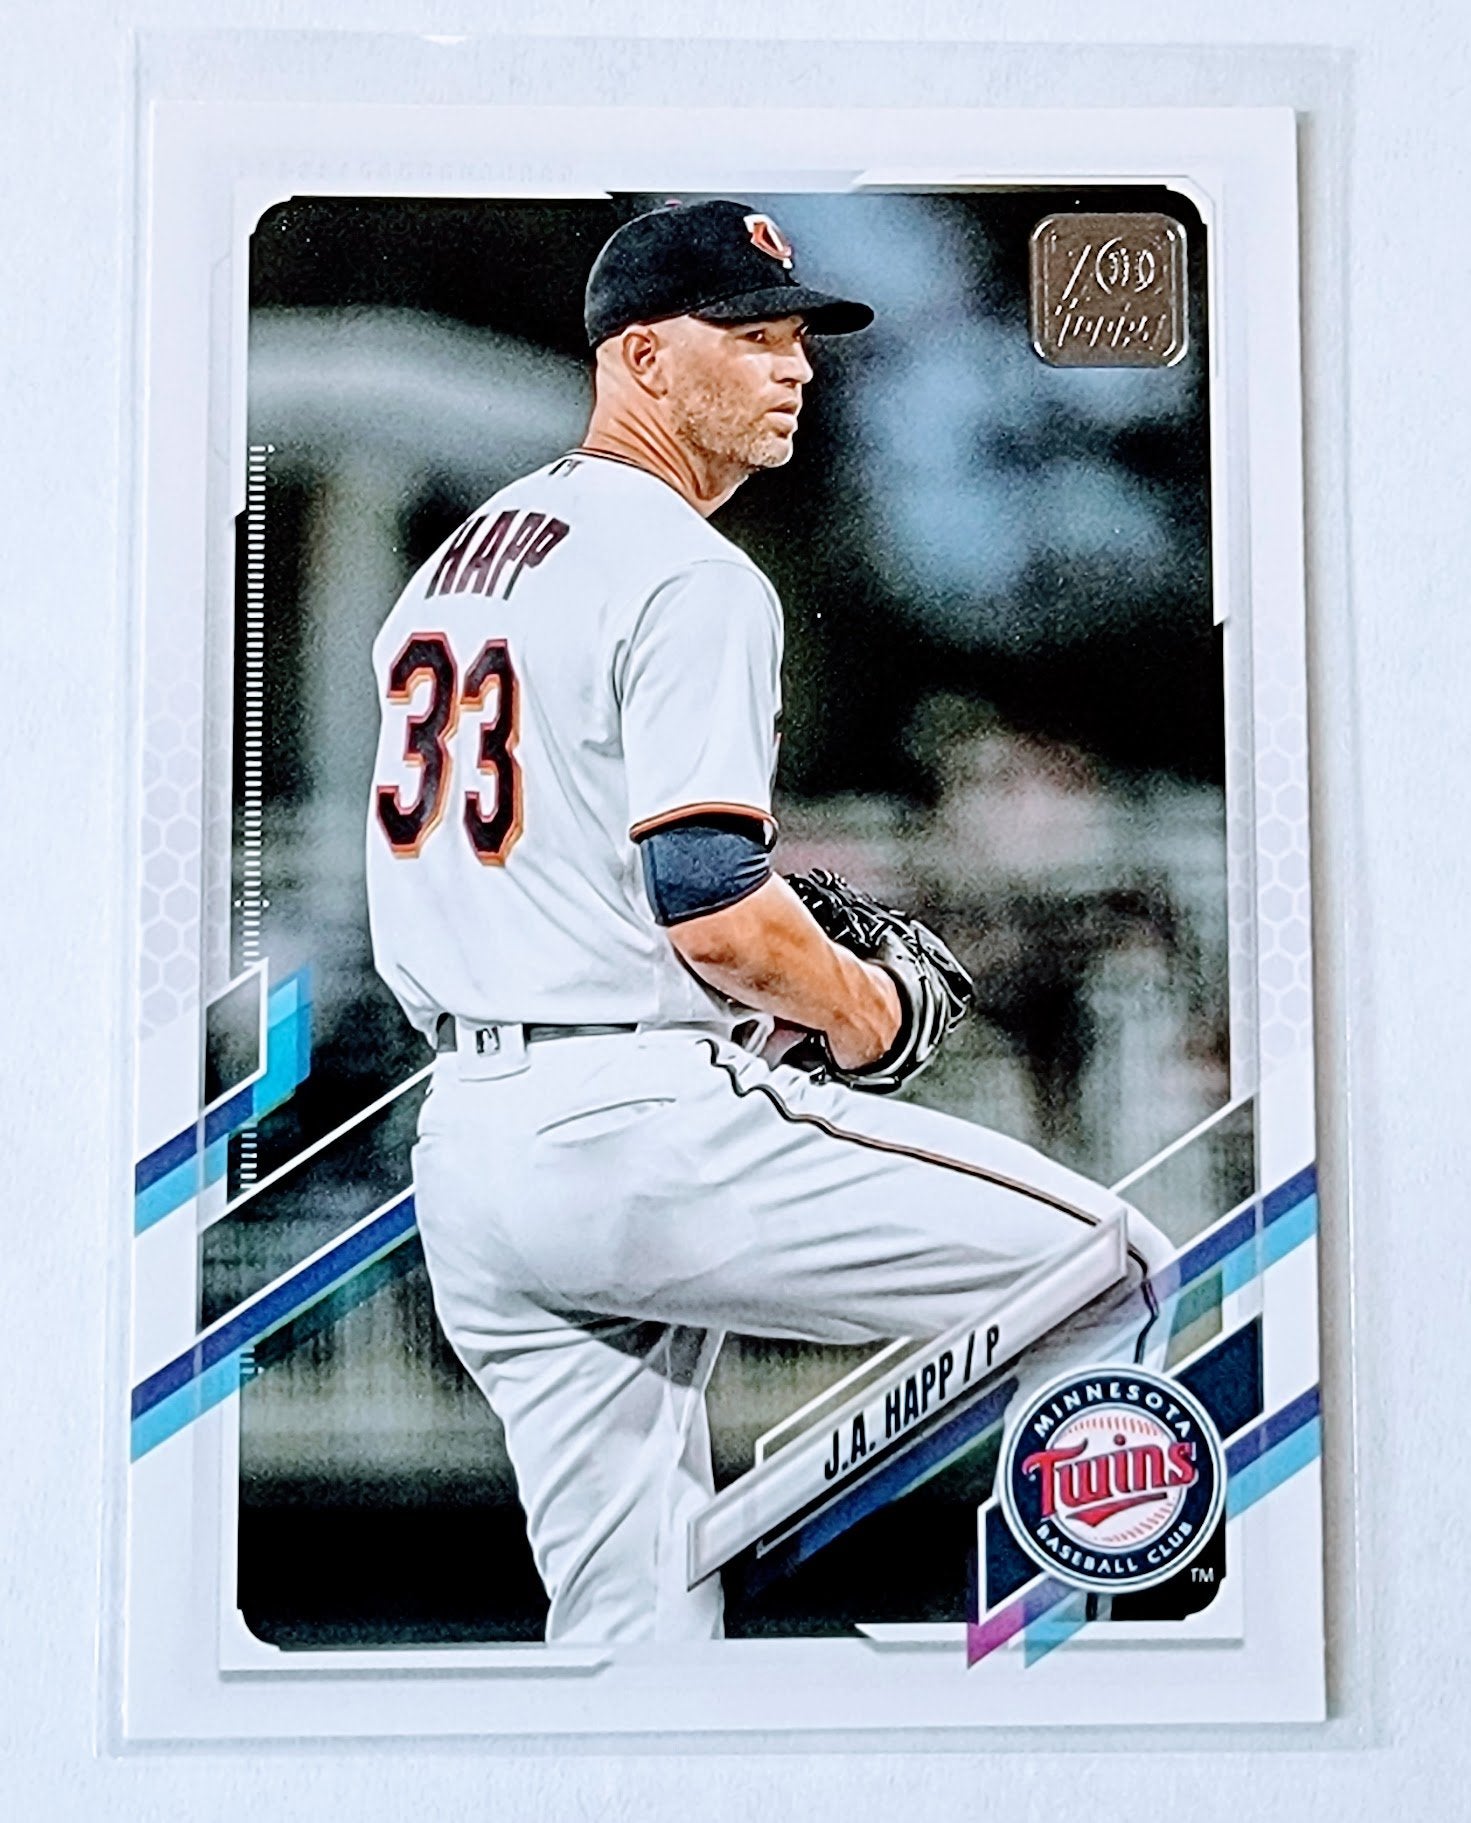 2021 Topps Update J.A. Happ Baseball Trading Card SMCB1 simple Xclusive Collectibles   